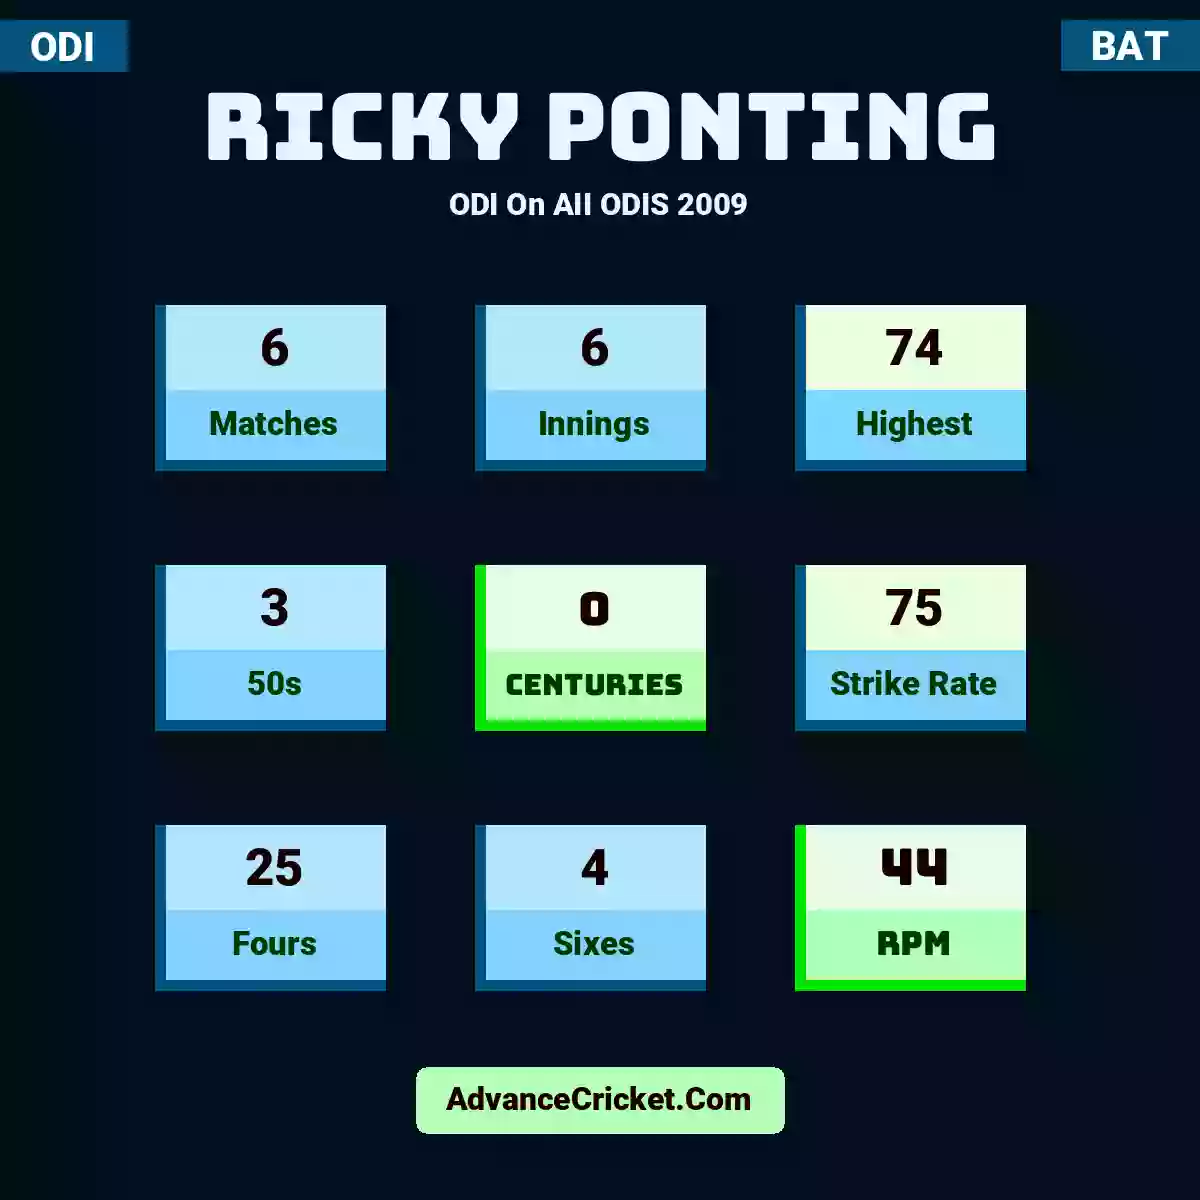 Ricky Ponting ODI  On AII ODIS 2009, Ricky Ponting played 6 matches, scored 74 runs as highest, 3 half-centuries, and 0 centuries, with a strike rate of 75. R.Ponting hit 25 fours and 4 sixes, with an RPM of 44.